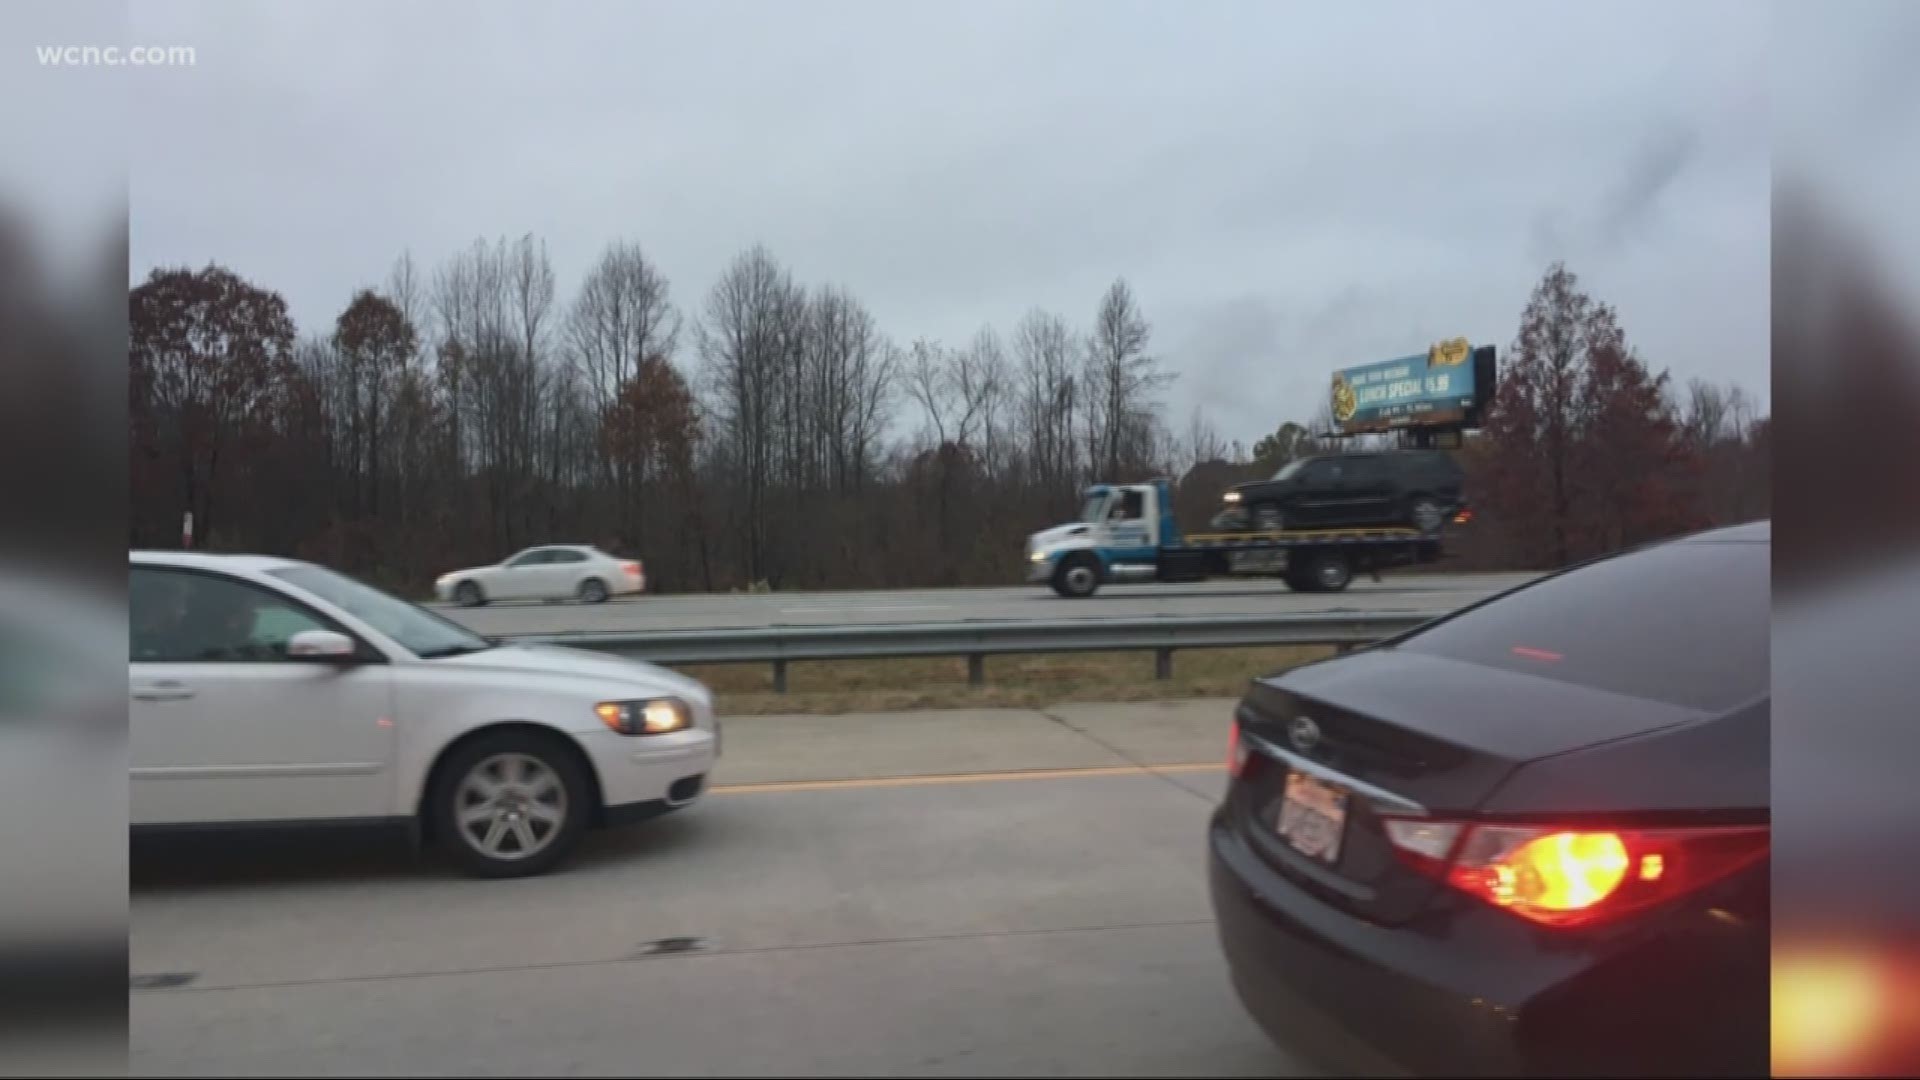 The crash shut down part of Interstate 85 for hours near mile marker 78 in southbound lanes.